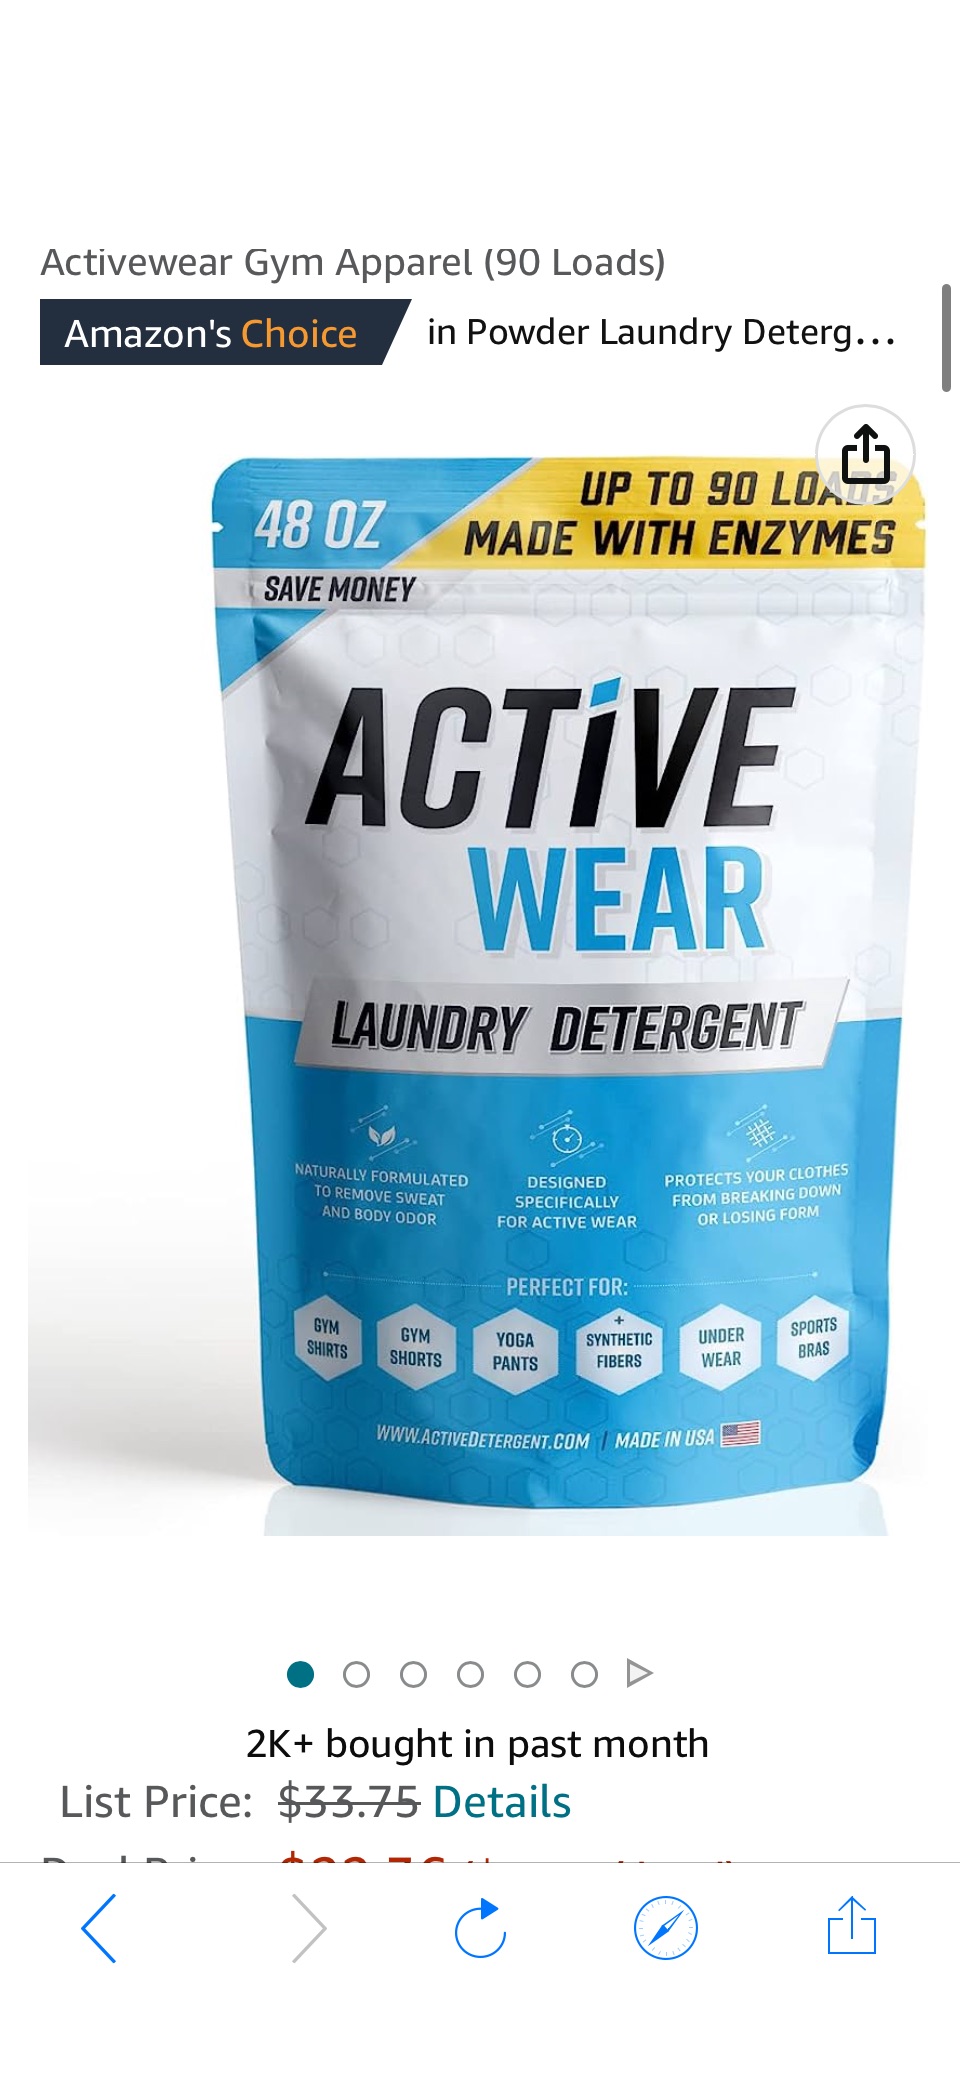 Amazon.com: Active Wear Laundry Detergent & Soak - Formulated for Sweat and Workout Clothes - Natural Performance Concentrate Enzyme Booster Deodorizer - Powder Wash for Activewear Gym Apparel (90 Loads) : Health & Household原价33.75